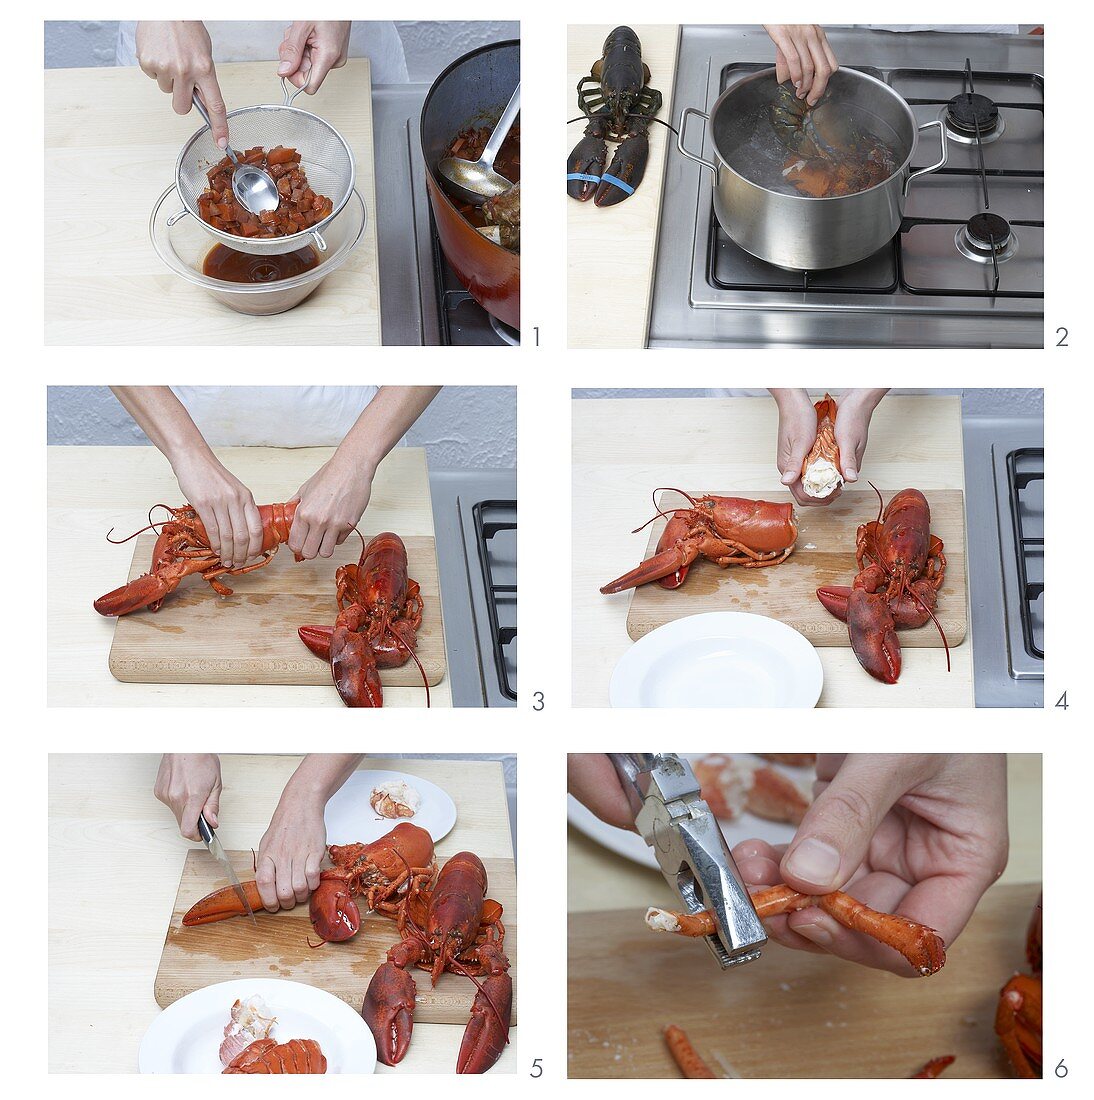 Cooking a lobster